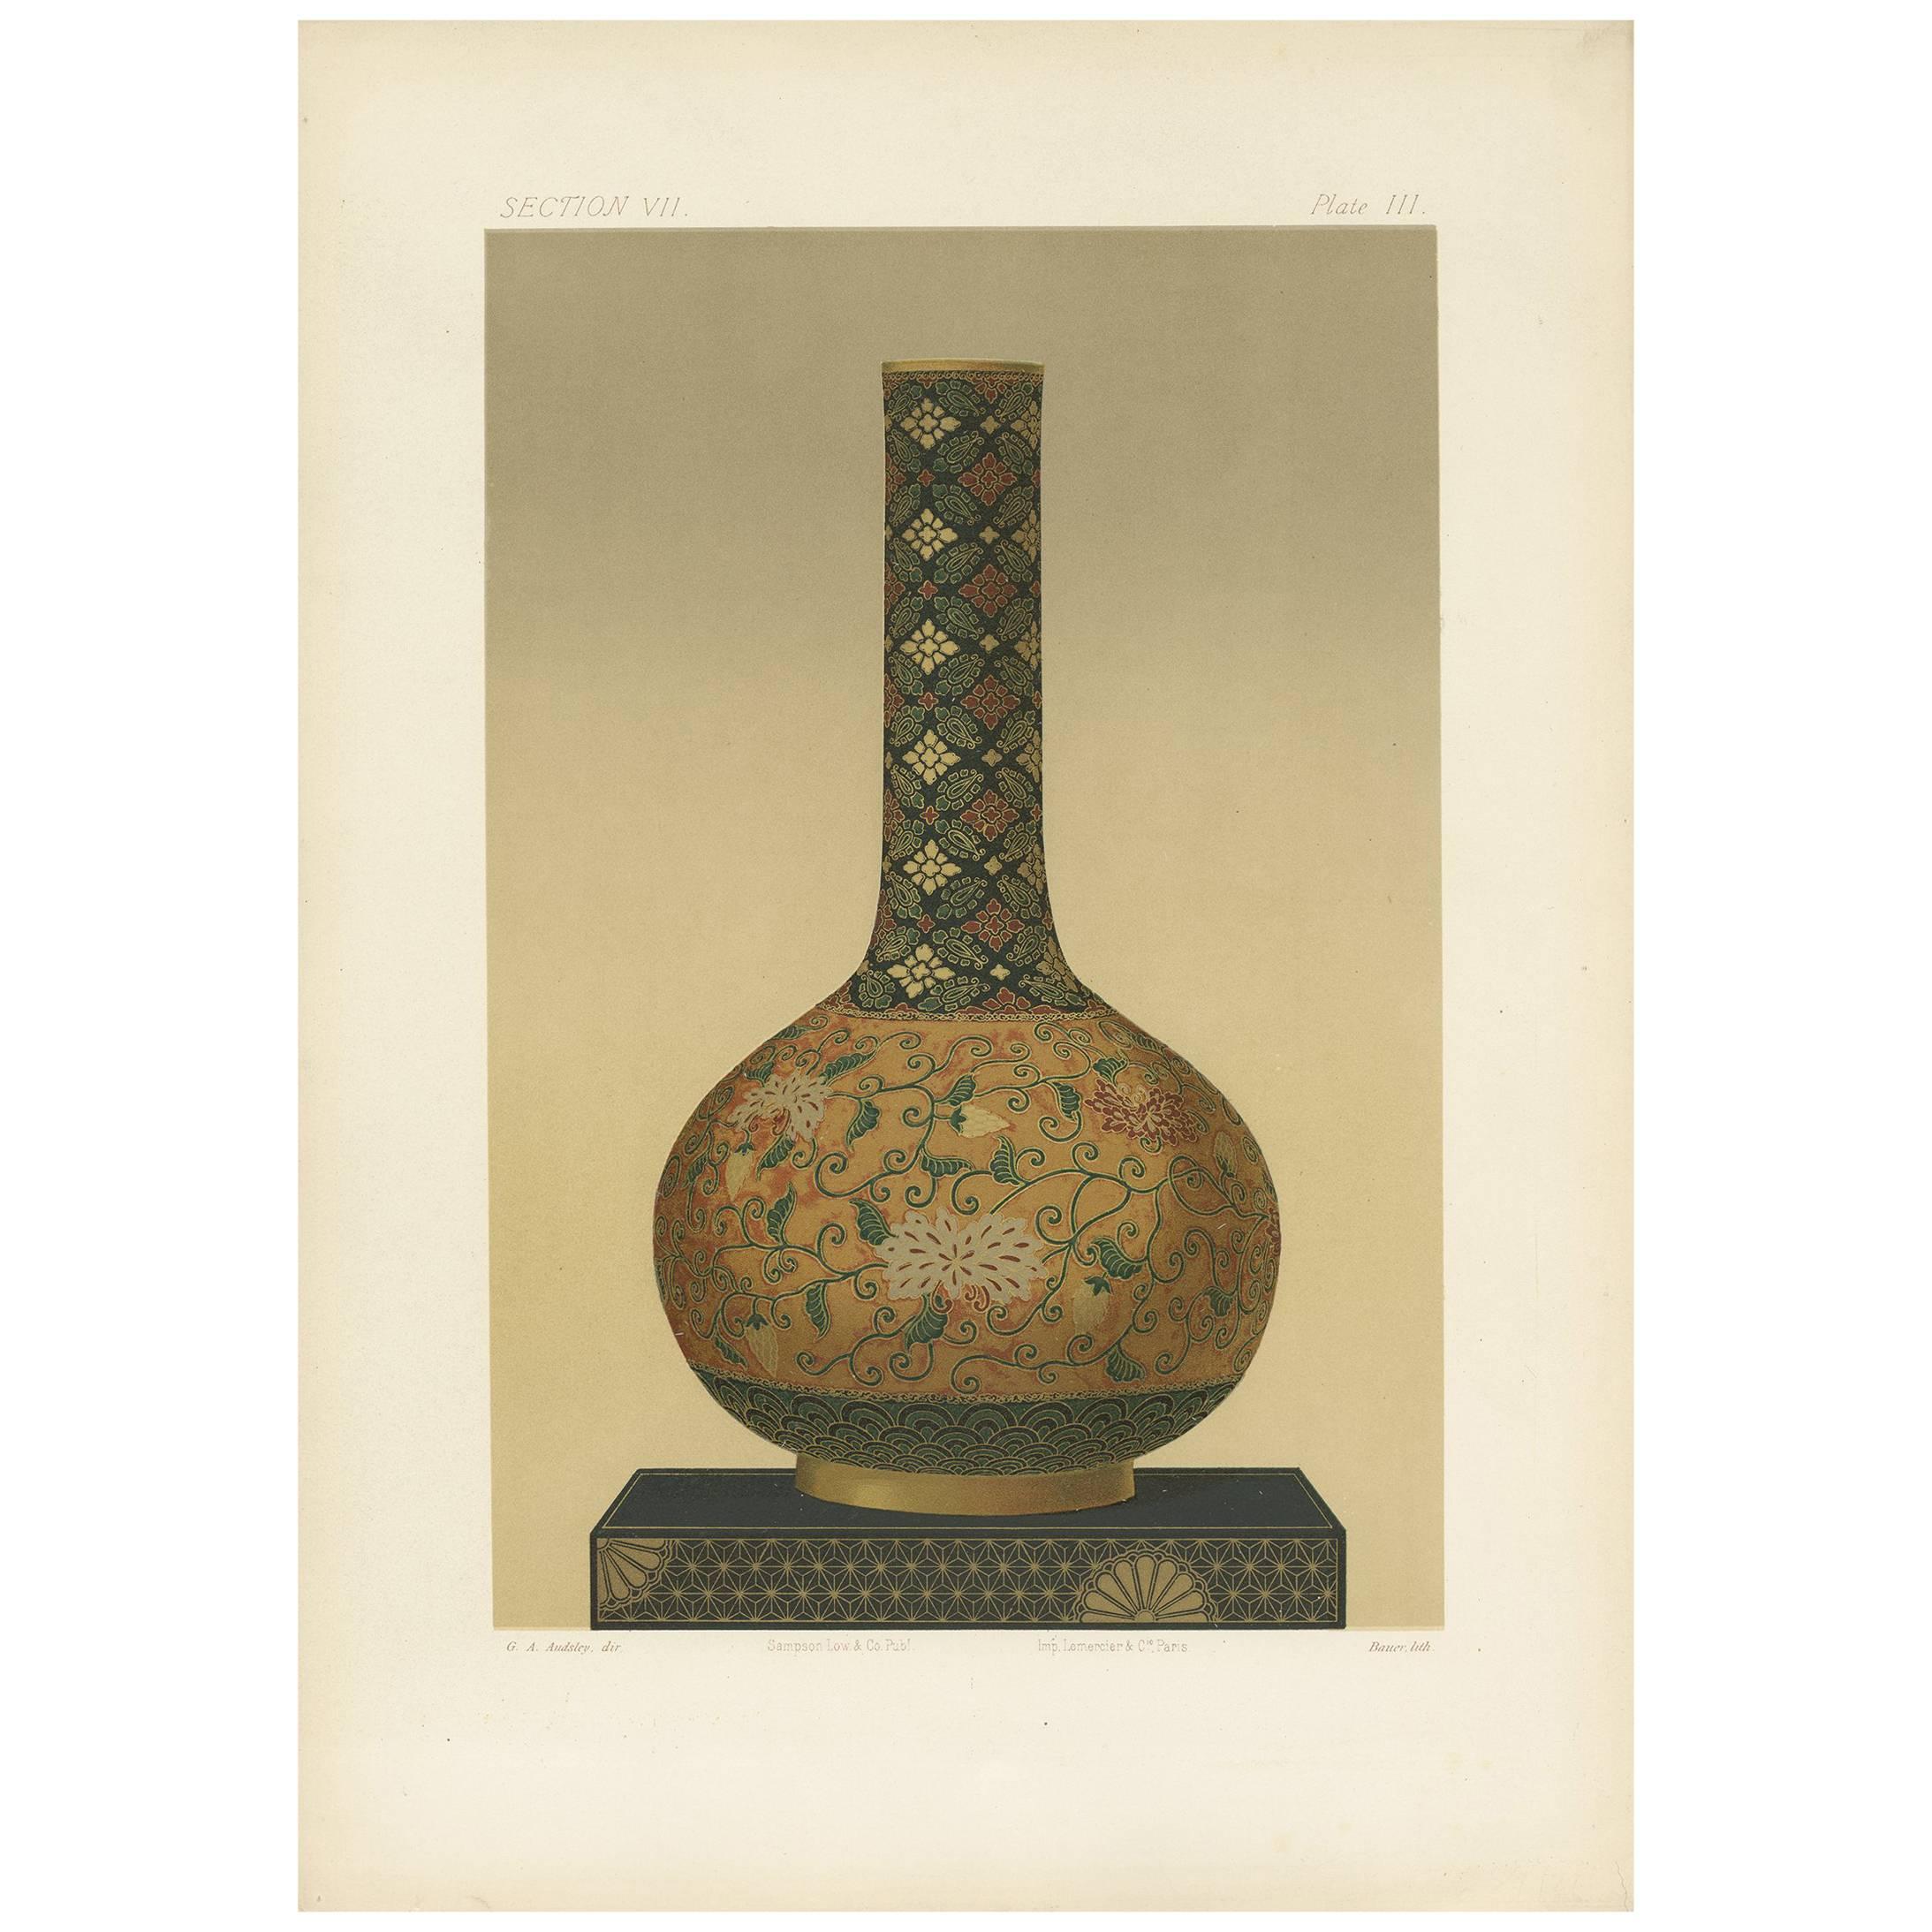 Antique Print of a Japanese Bottle by G. Audsley, 1884